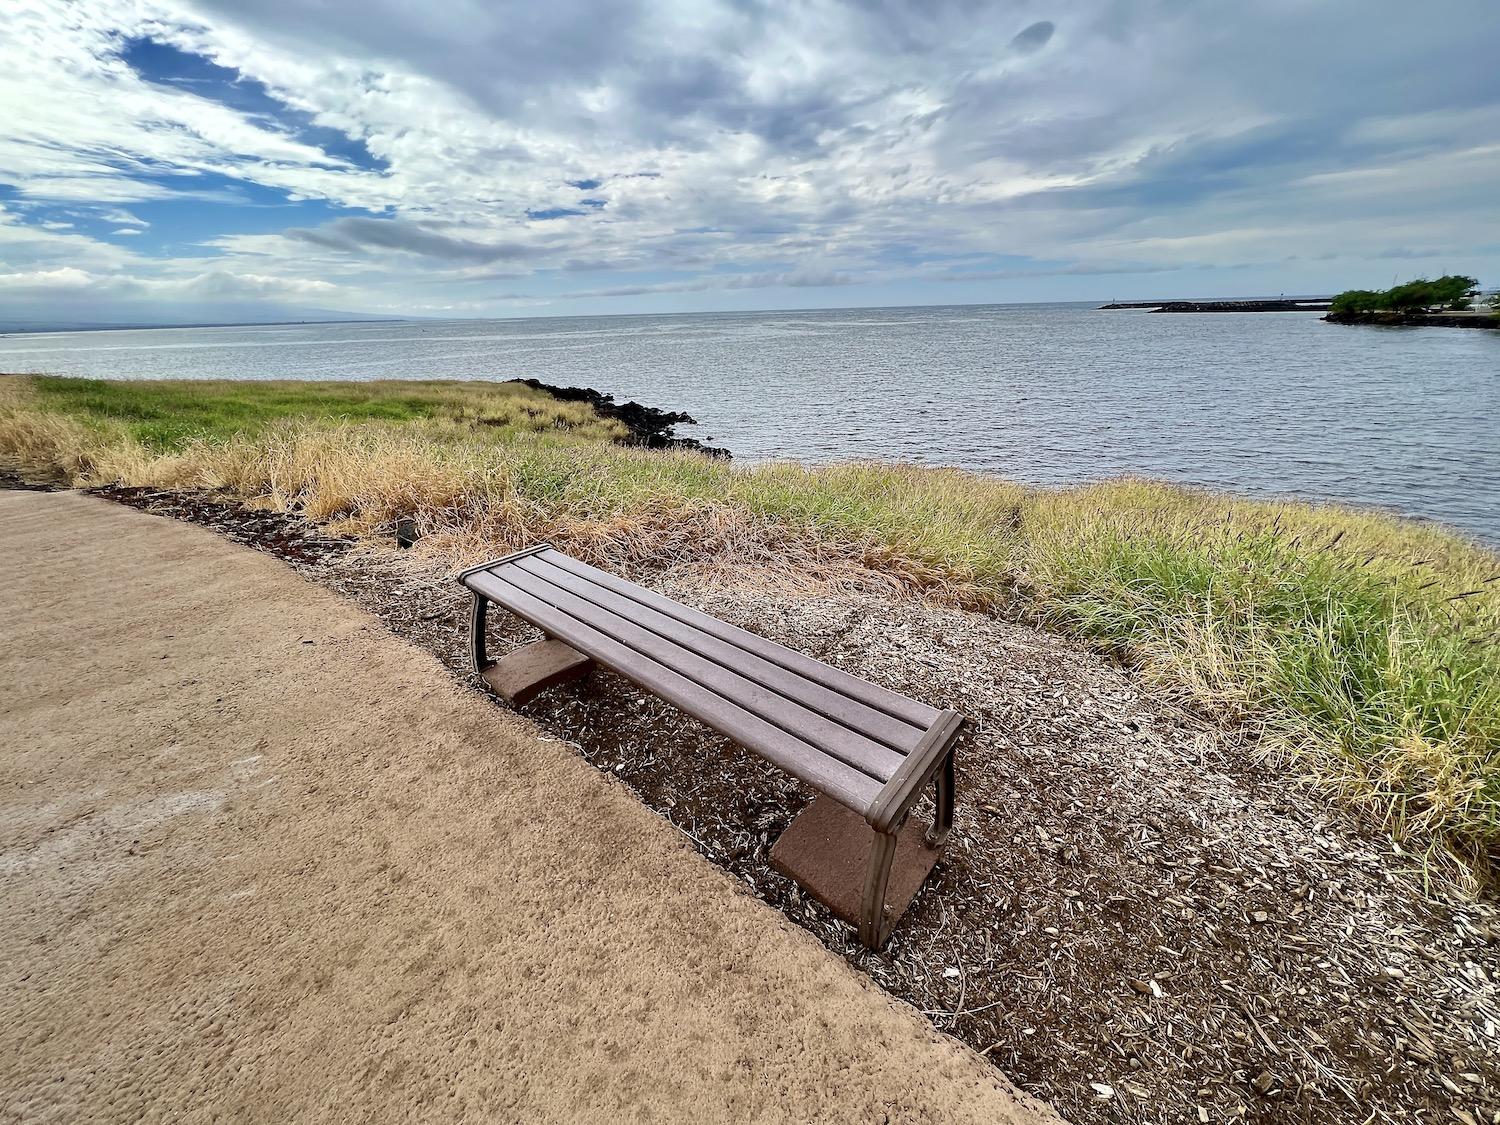 There's a bench along the coastal Ala Kahakai National Historic Trail in the park where you can watch for humpback whales, dolphins and sharks.